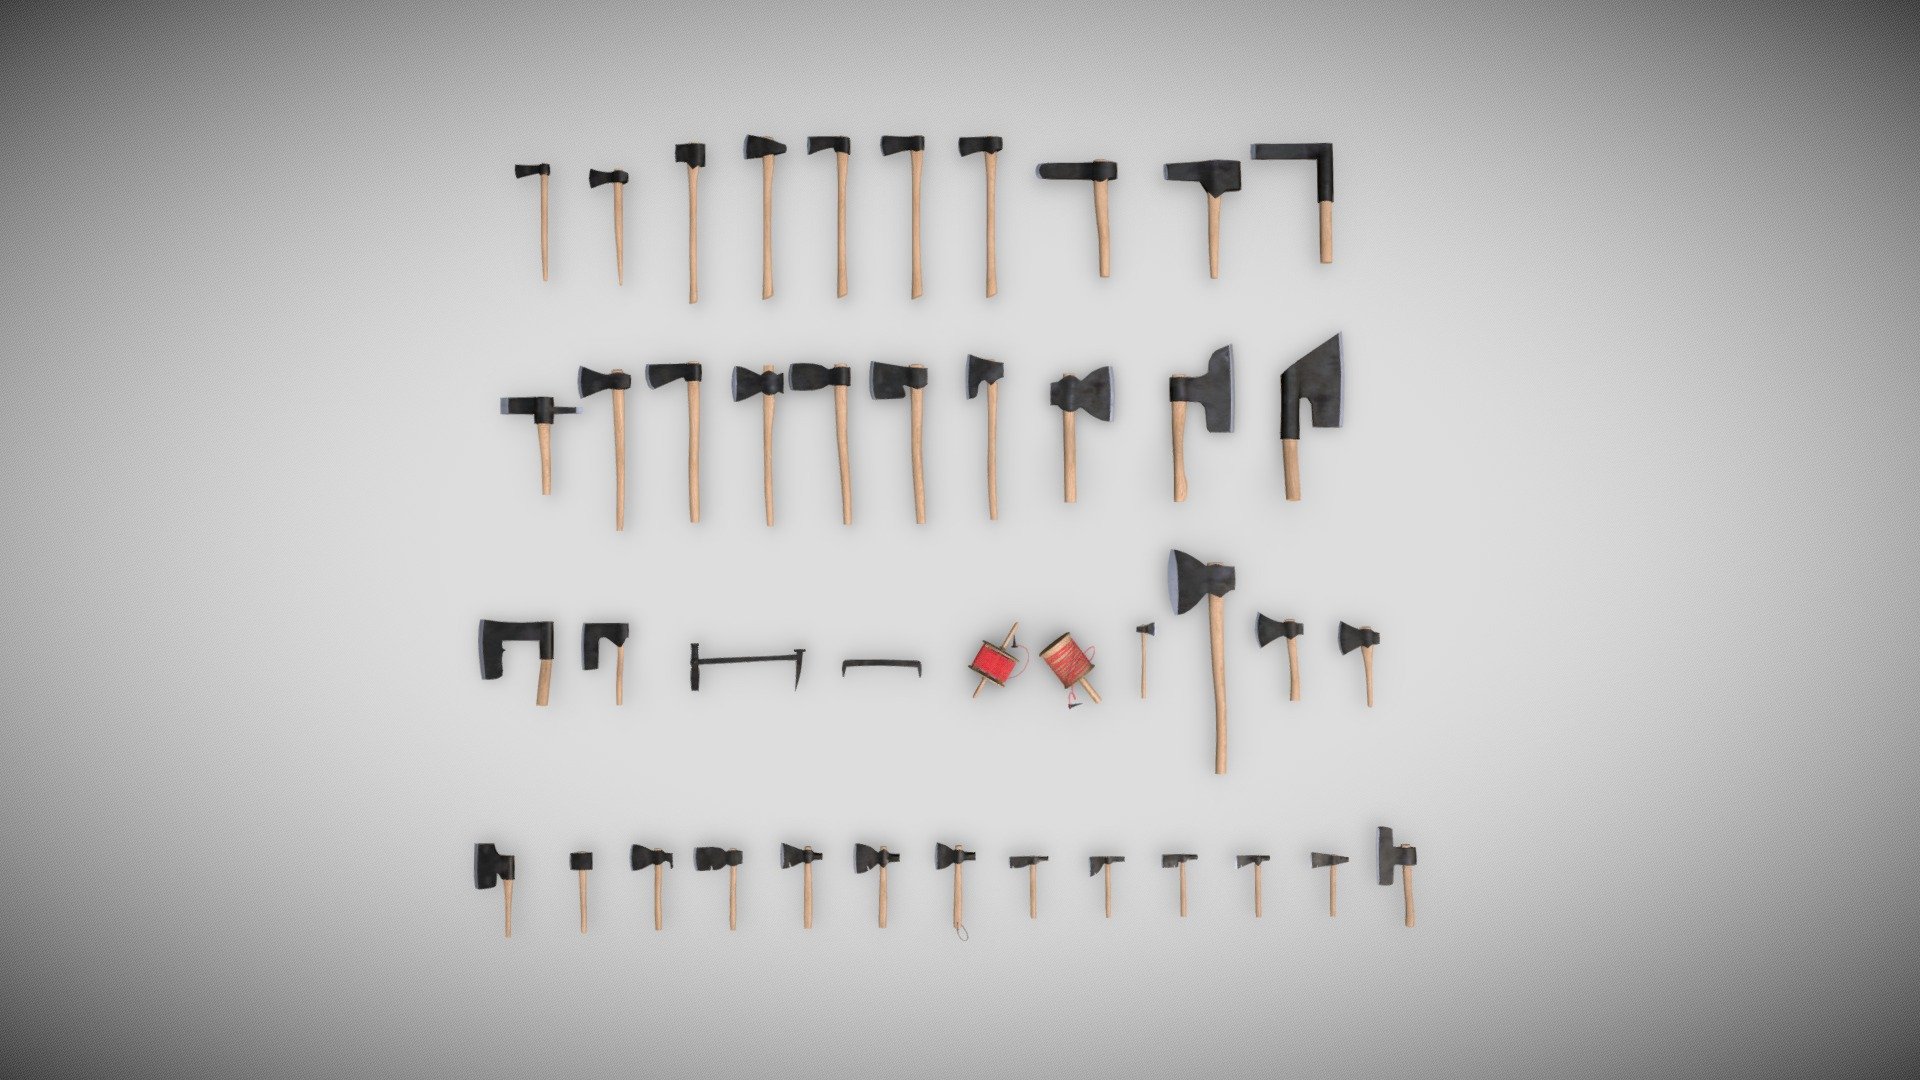 Modeled from Eric Sloane's Museum of Early American Tools, pages 10-21. Scale is approximate and not authoritative.

Textured with CC0 Textures assets.

Made with Blender 3d model